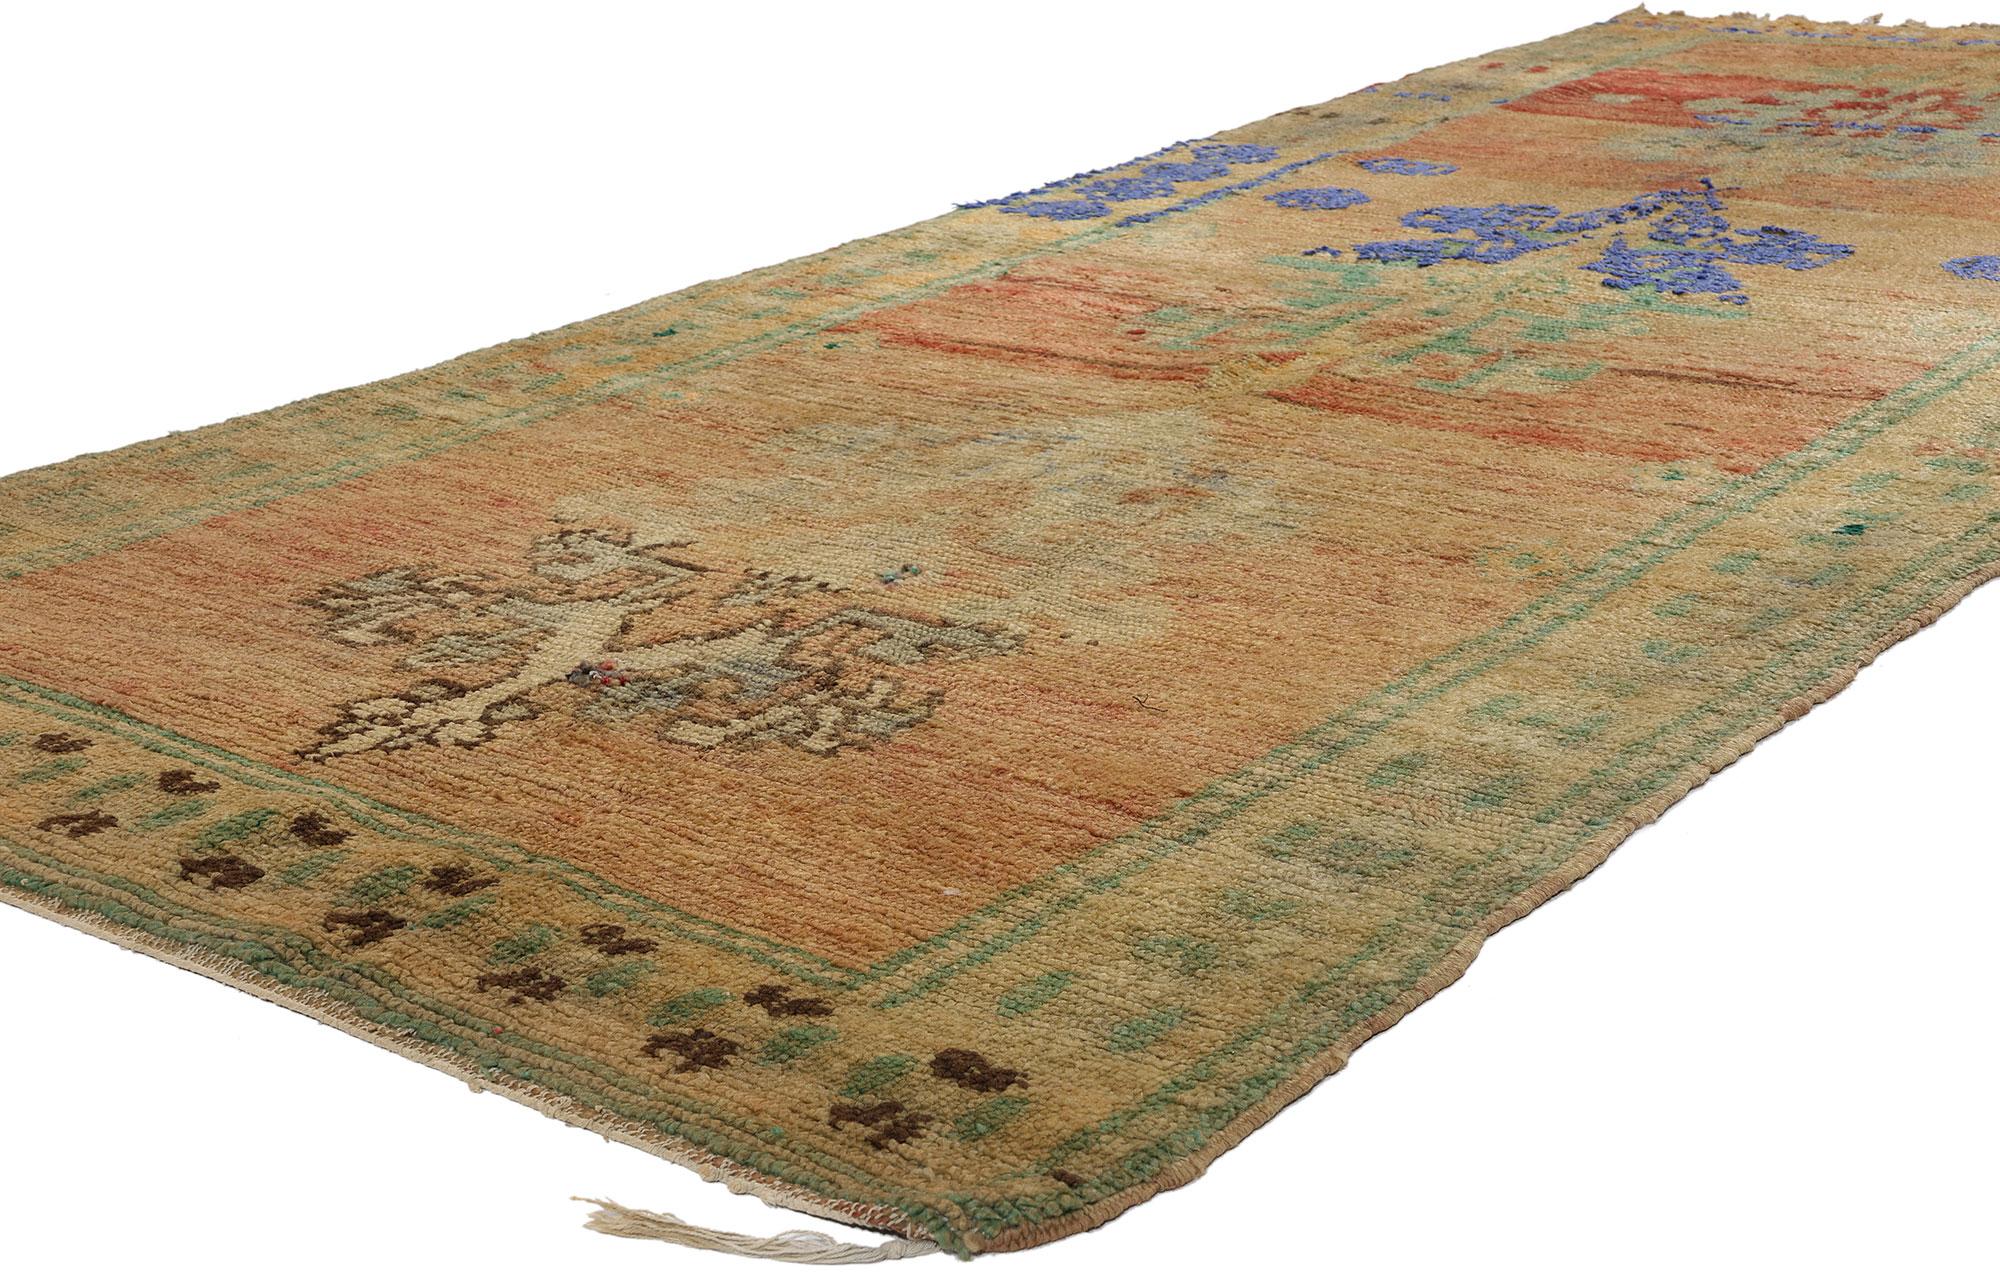 21824 Vintage Boujad Moroccan Rug, 04'01 x 10'06. Step into the embrace of woven beauty with this hand-knotted wool vintage Boujad Moroccan rug—a captivating vision that seamlessly marries the free-spirited allure of Bohemian style with nomadic